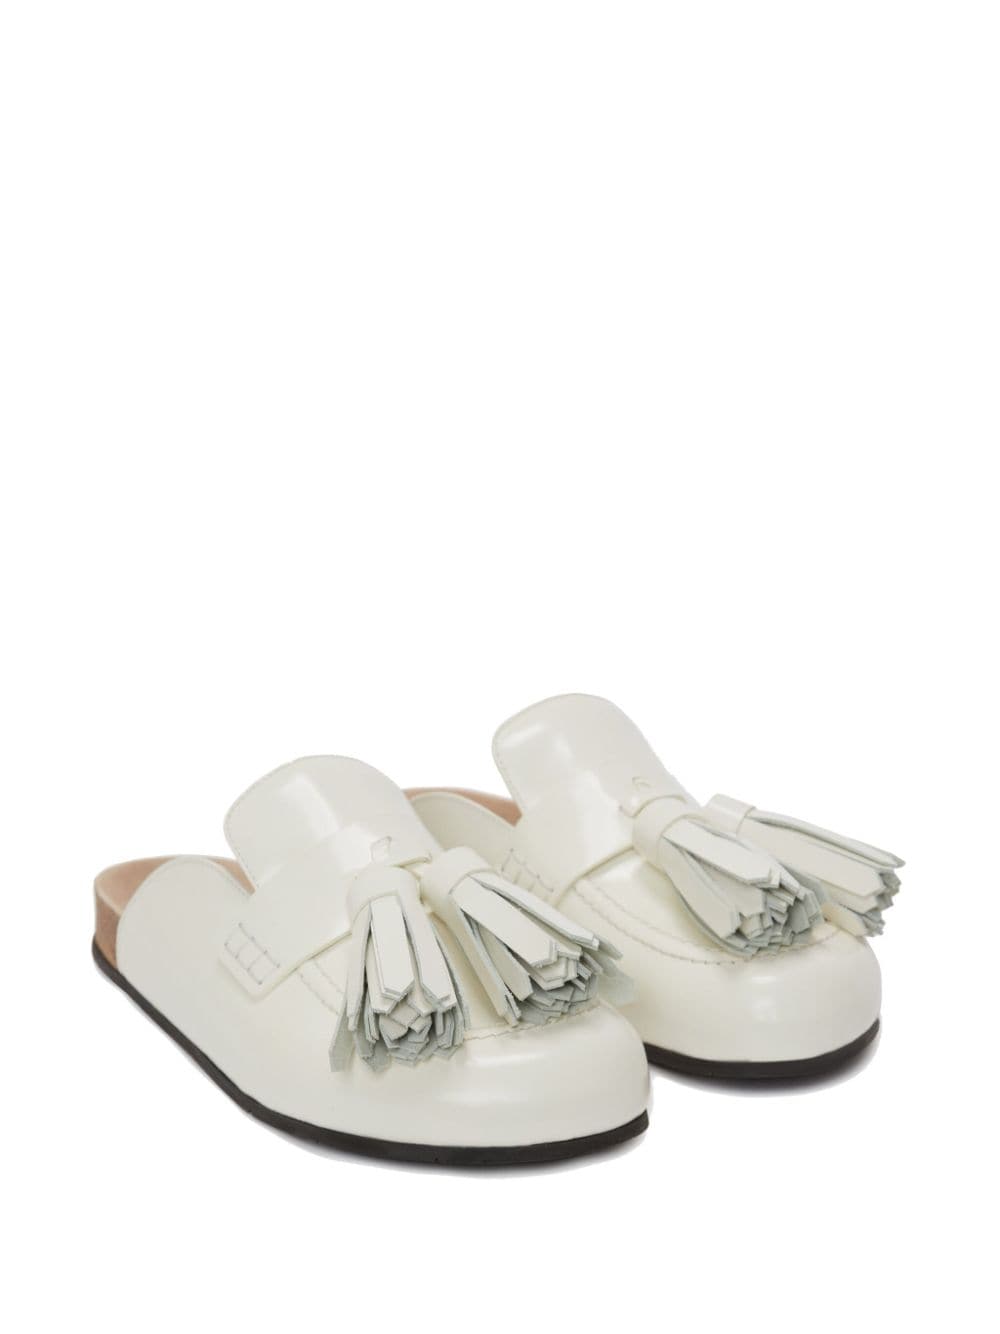 JW Anderson tassel-detail loafer leather mules - Wit